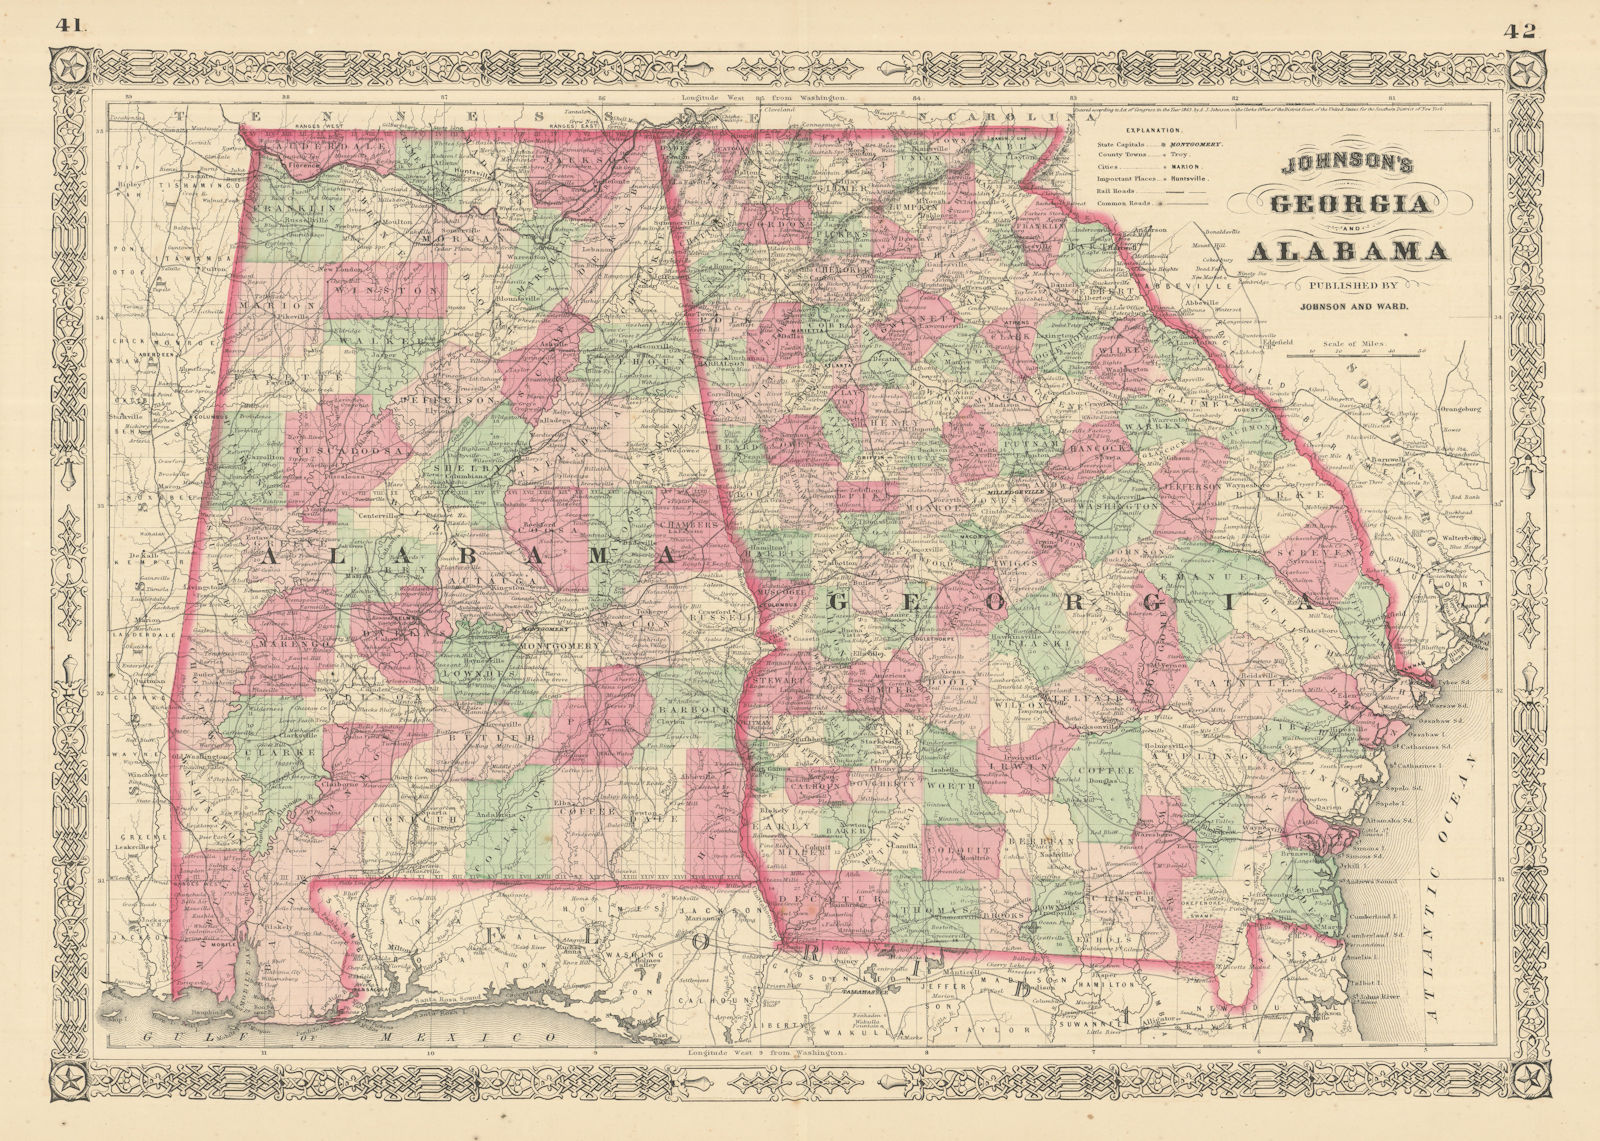 Johnson's Georgia & Alabama. US state map showing counties 1866 old